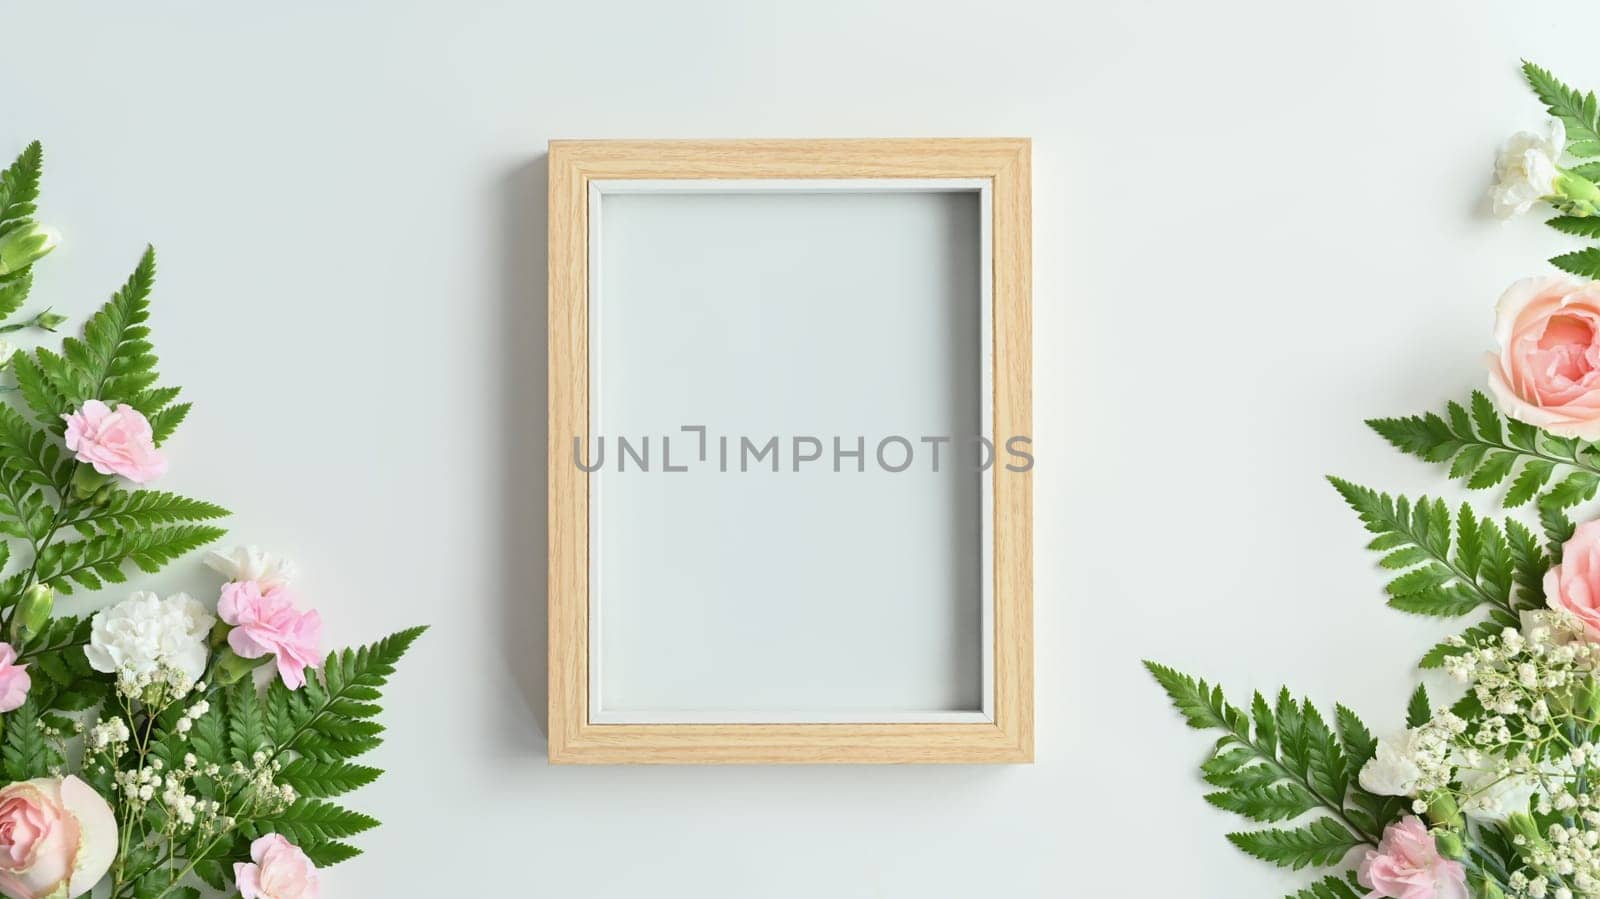 Blank wooden picture frame with pink rose, carnation and fern leaves on white background. Spring floral background, copy space.